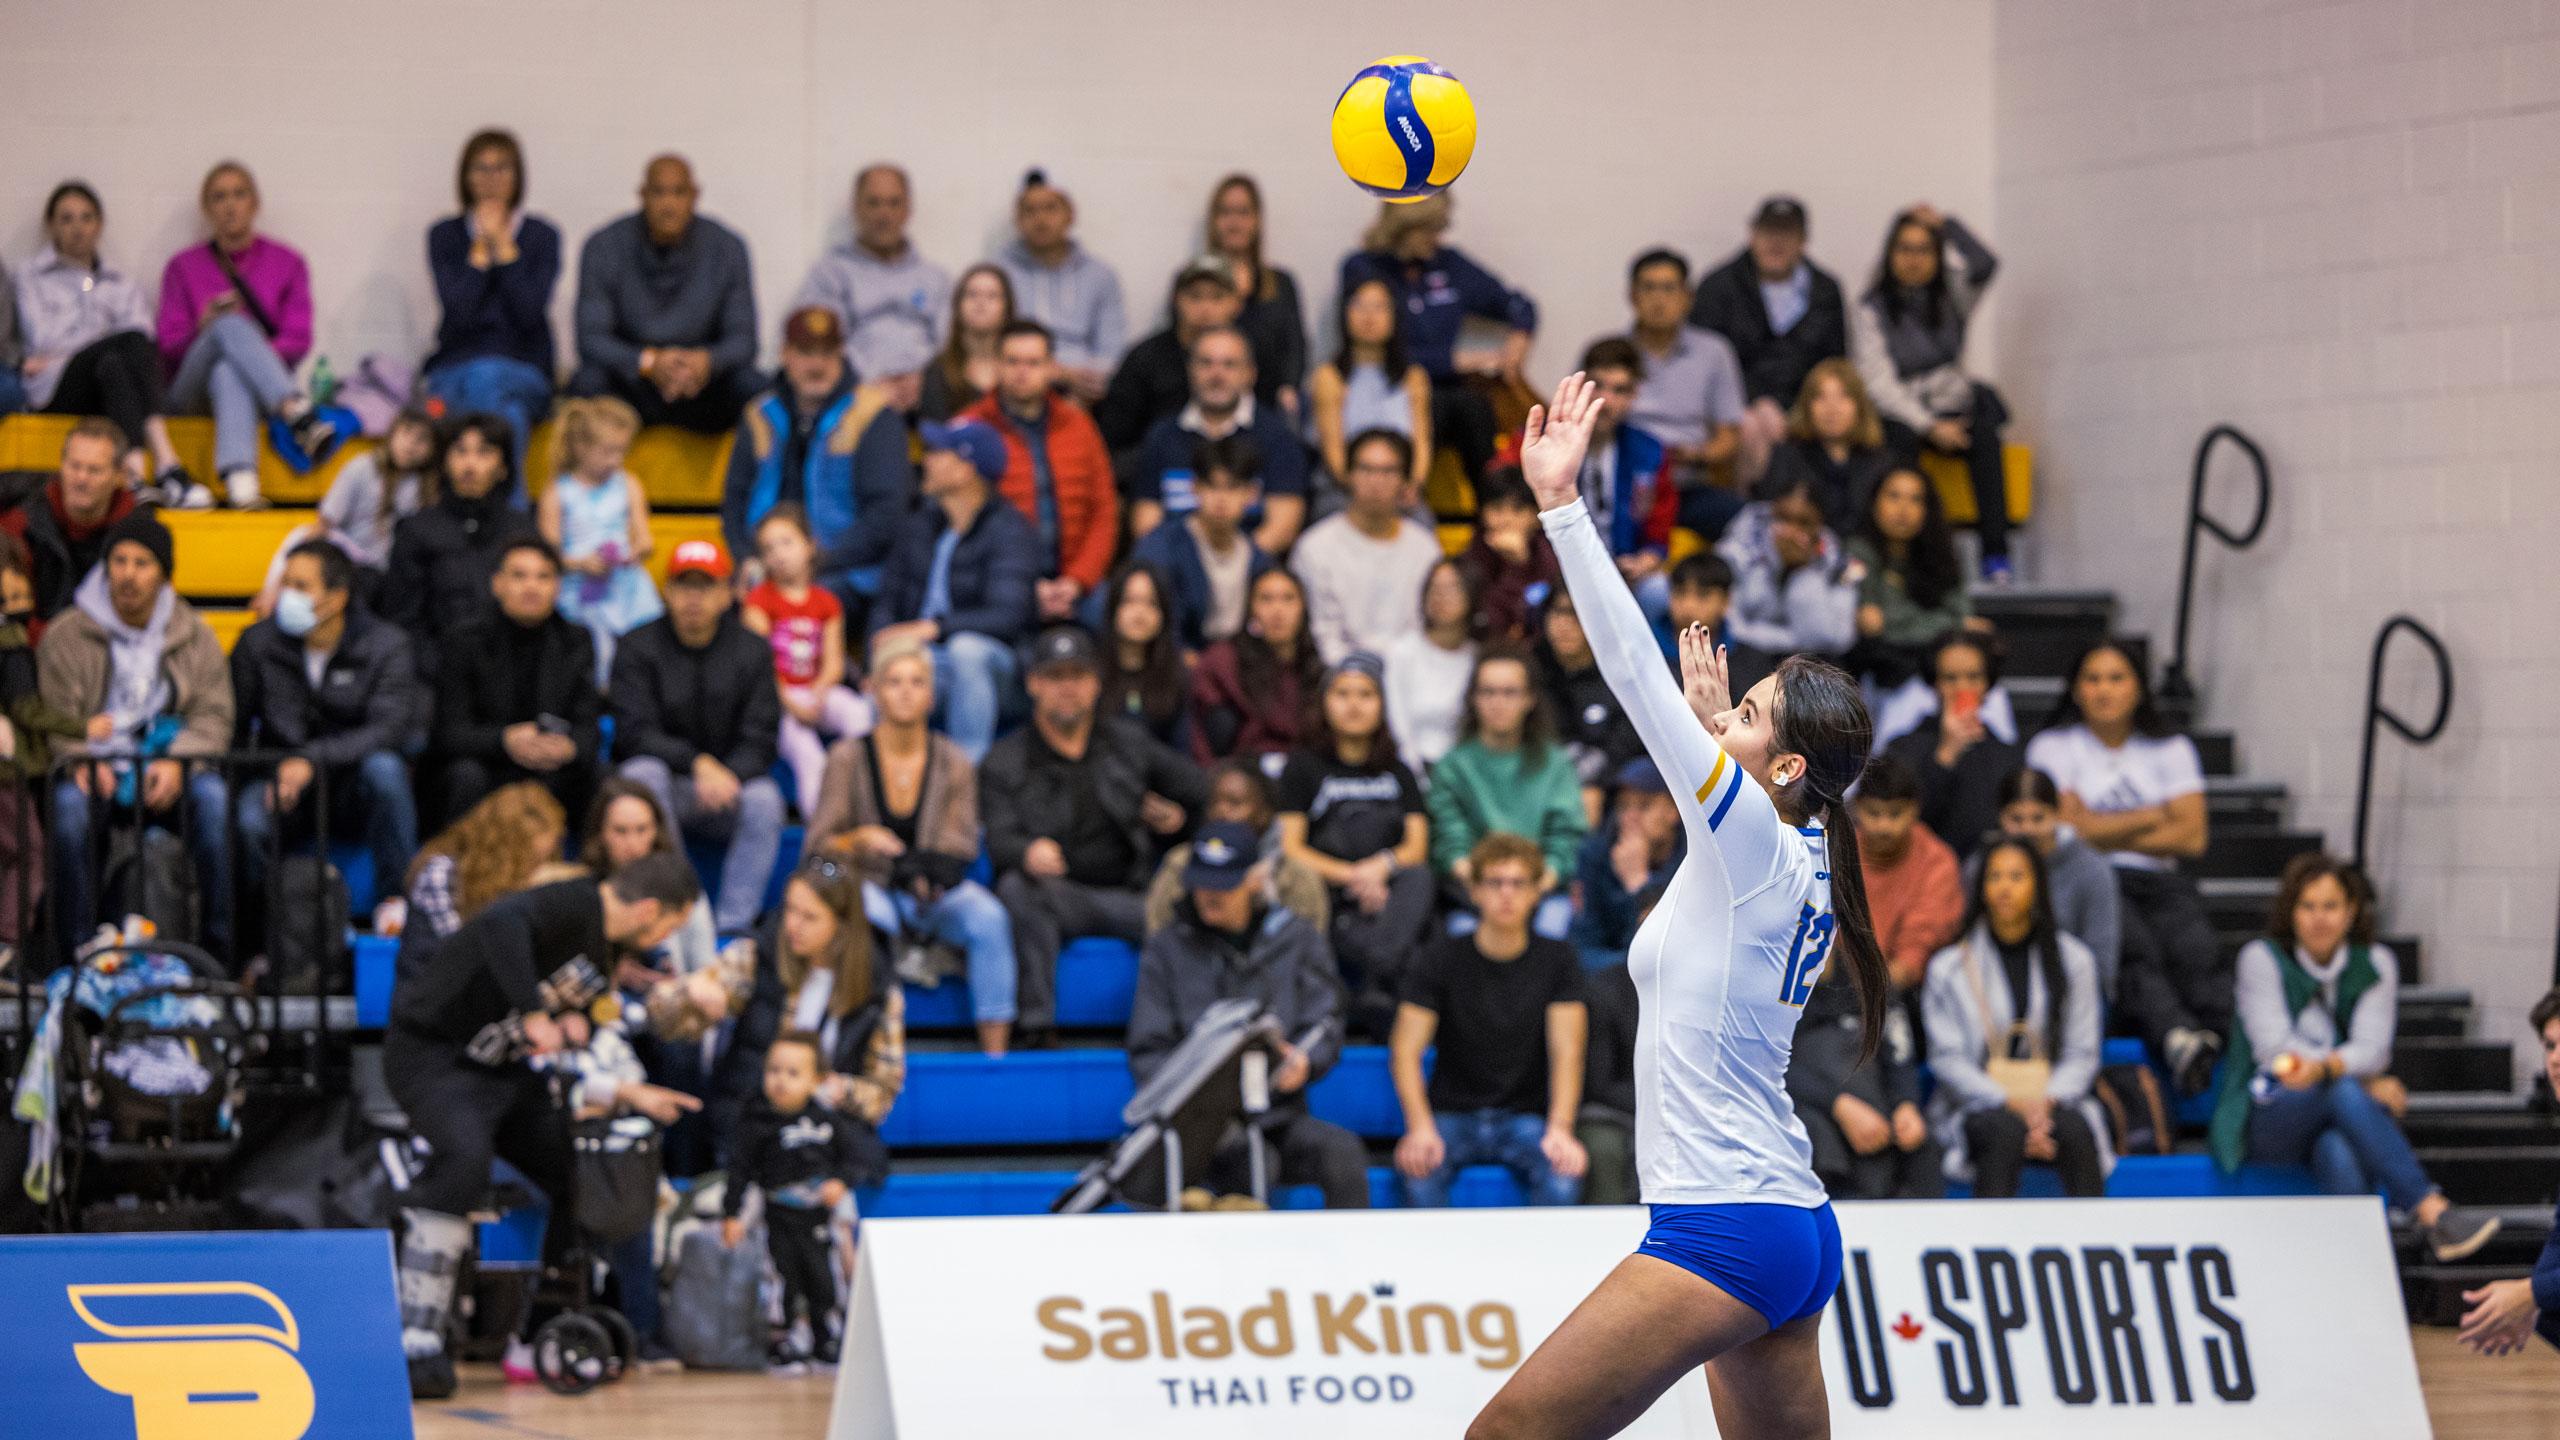 A TMU women's volleyball player in a white jersey serves the volleyball